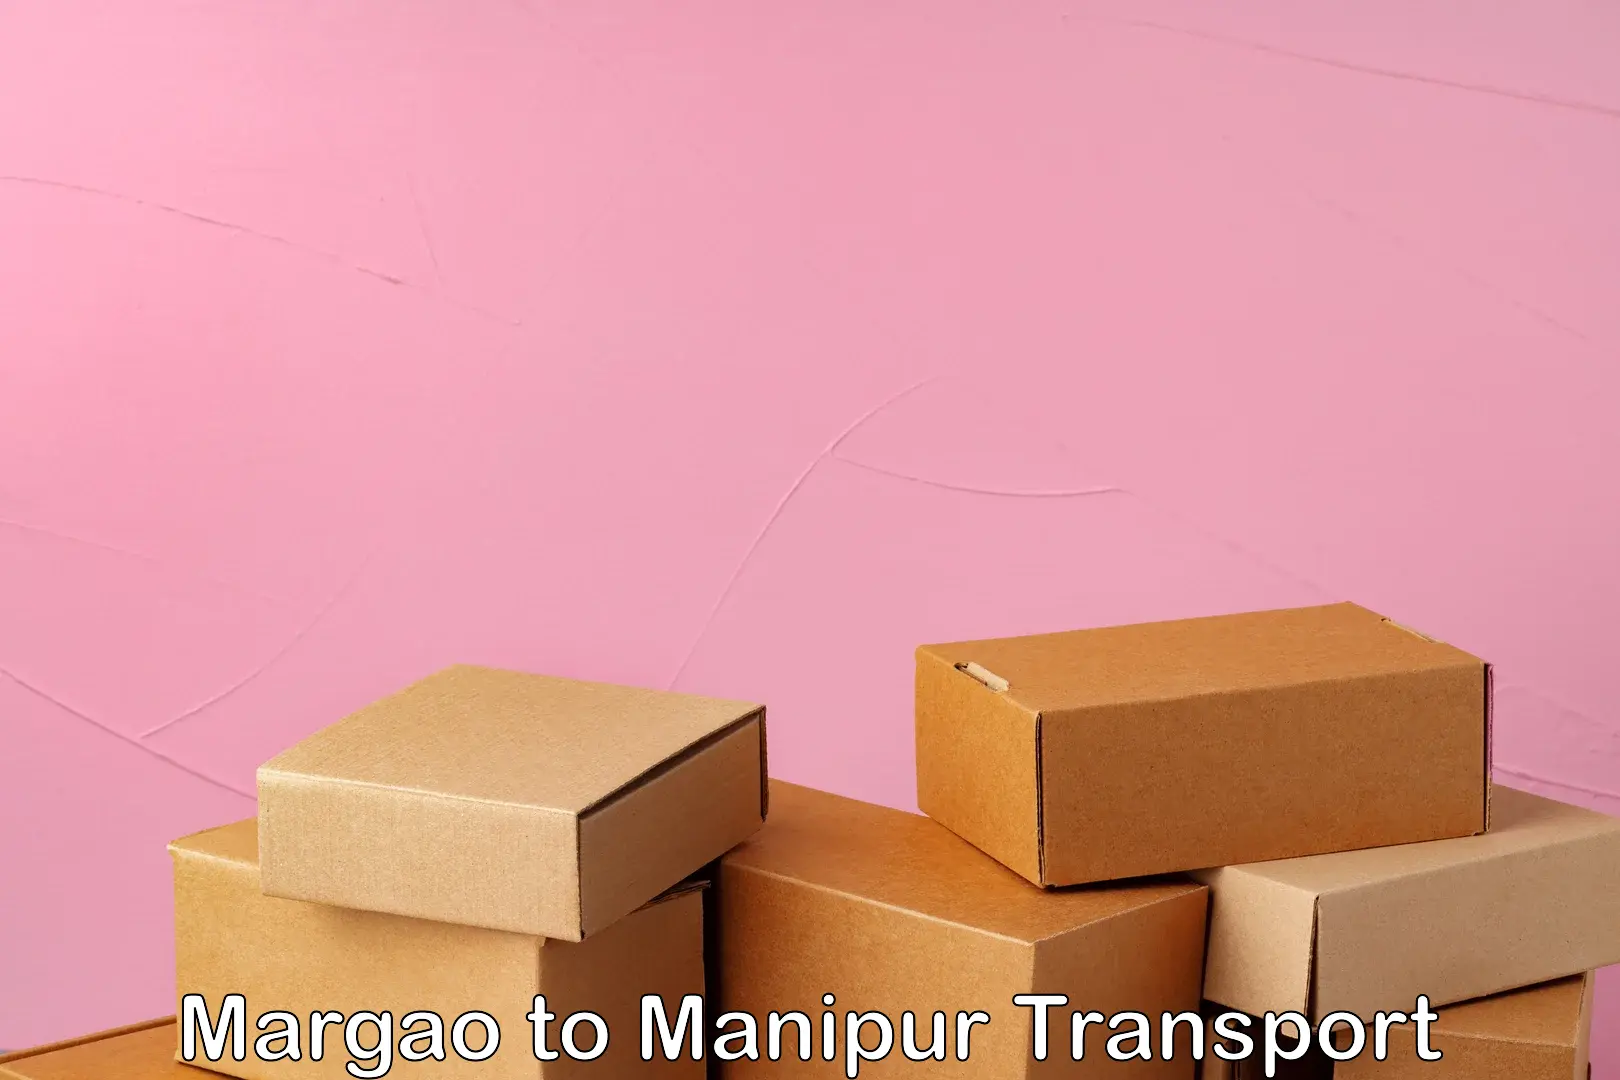 Container transport service Margao to Manipur